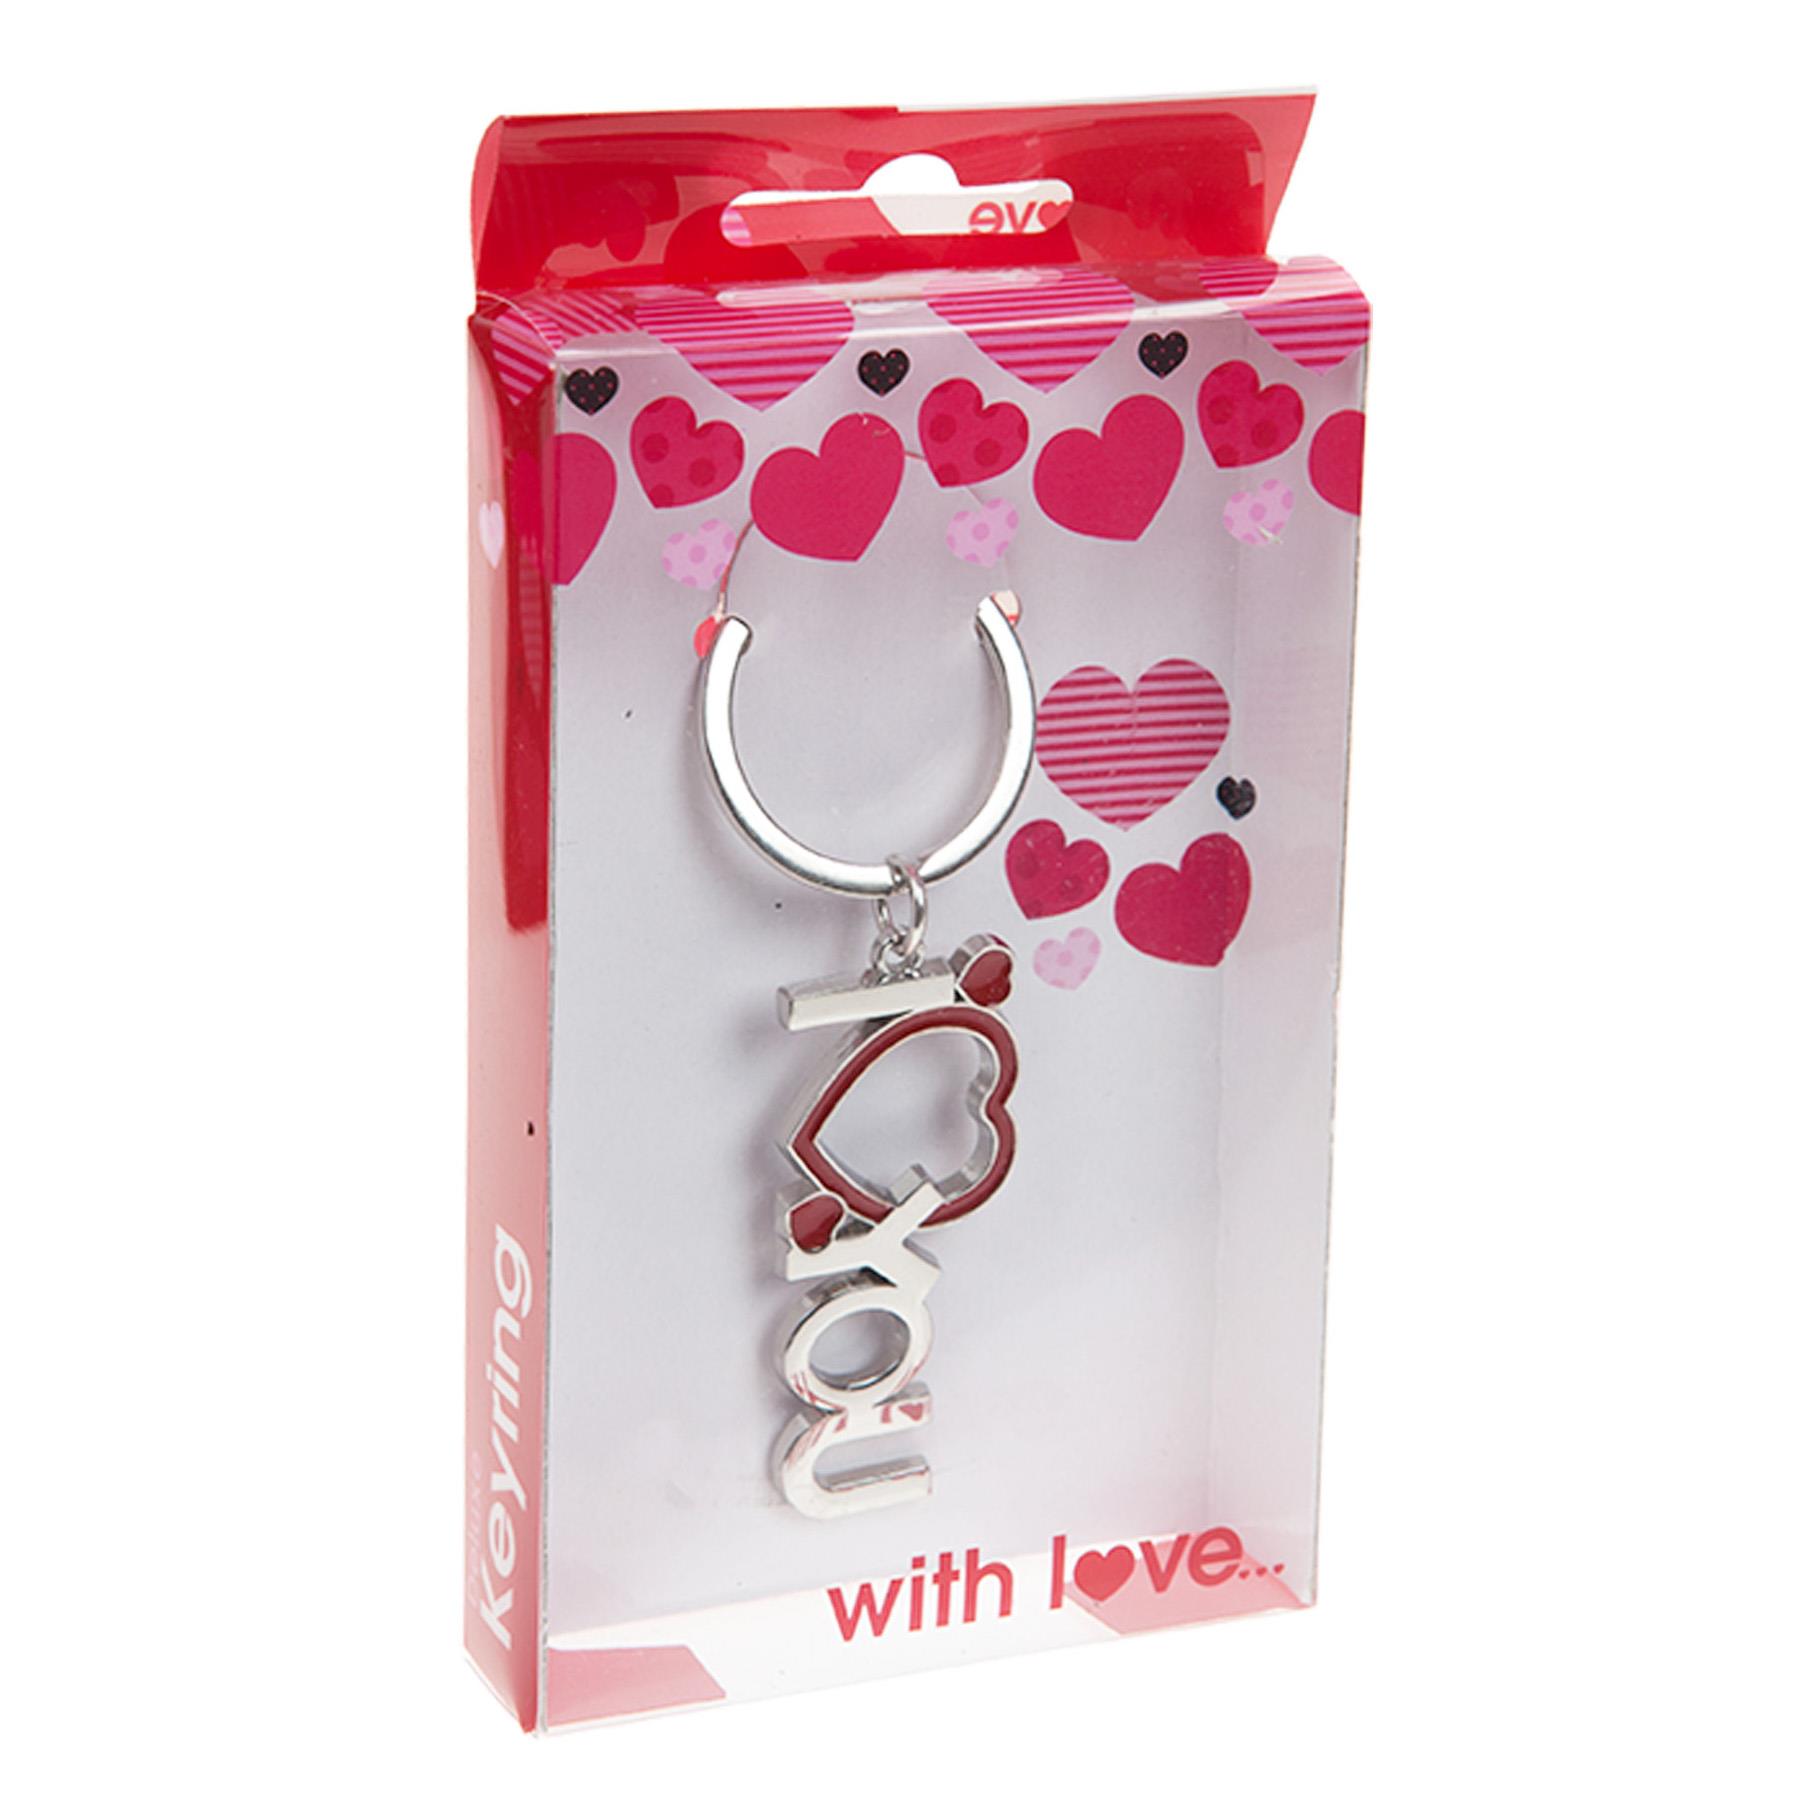 'I Love You' with Heart Key Ring - Valentine's Day / Birthday Gift